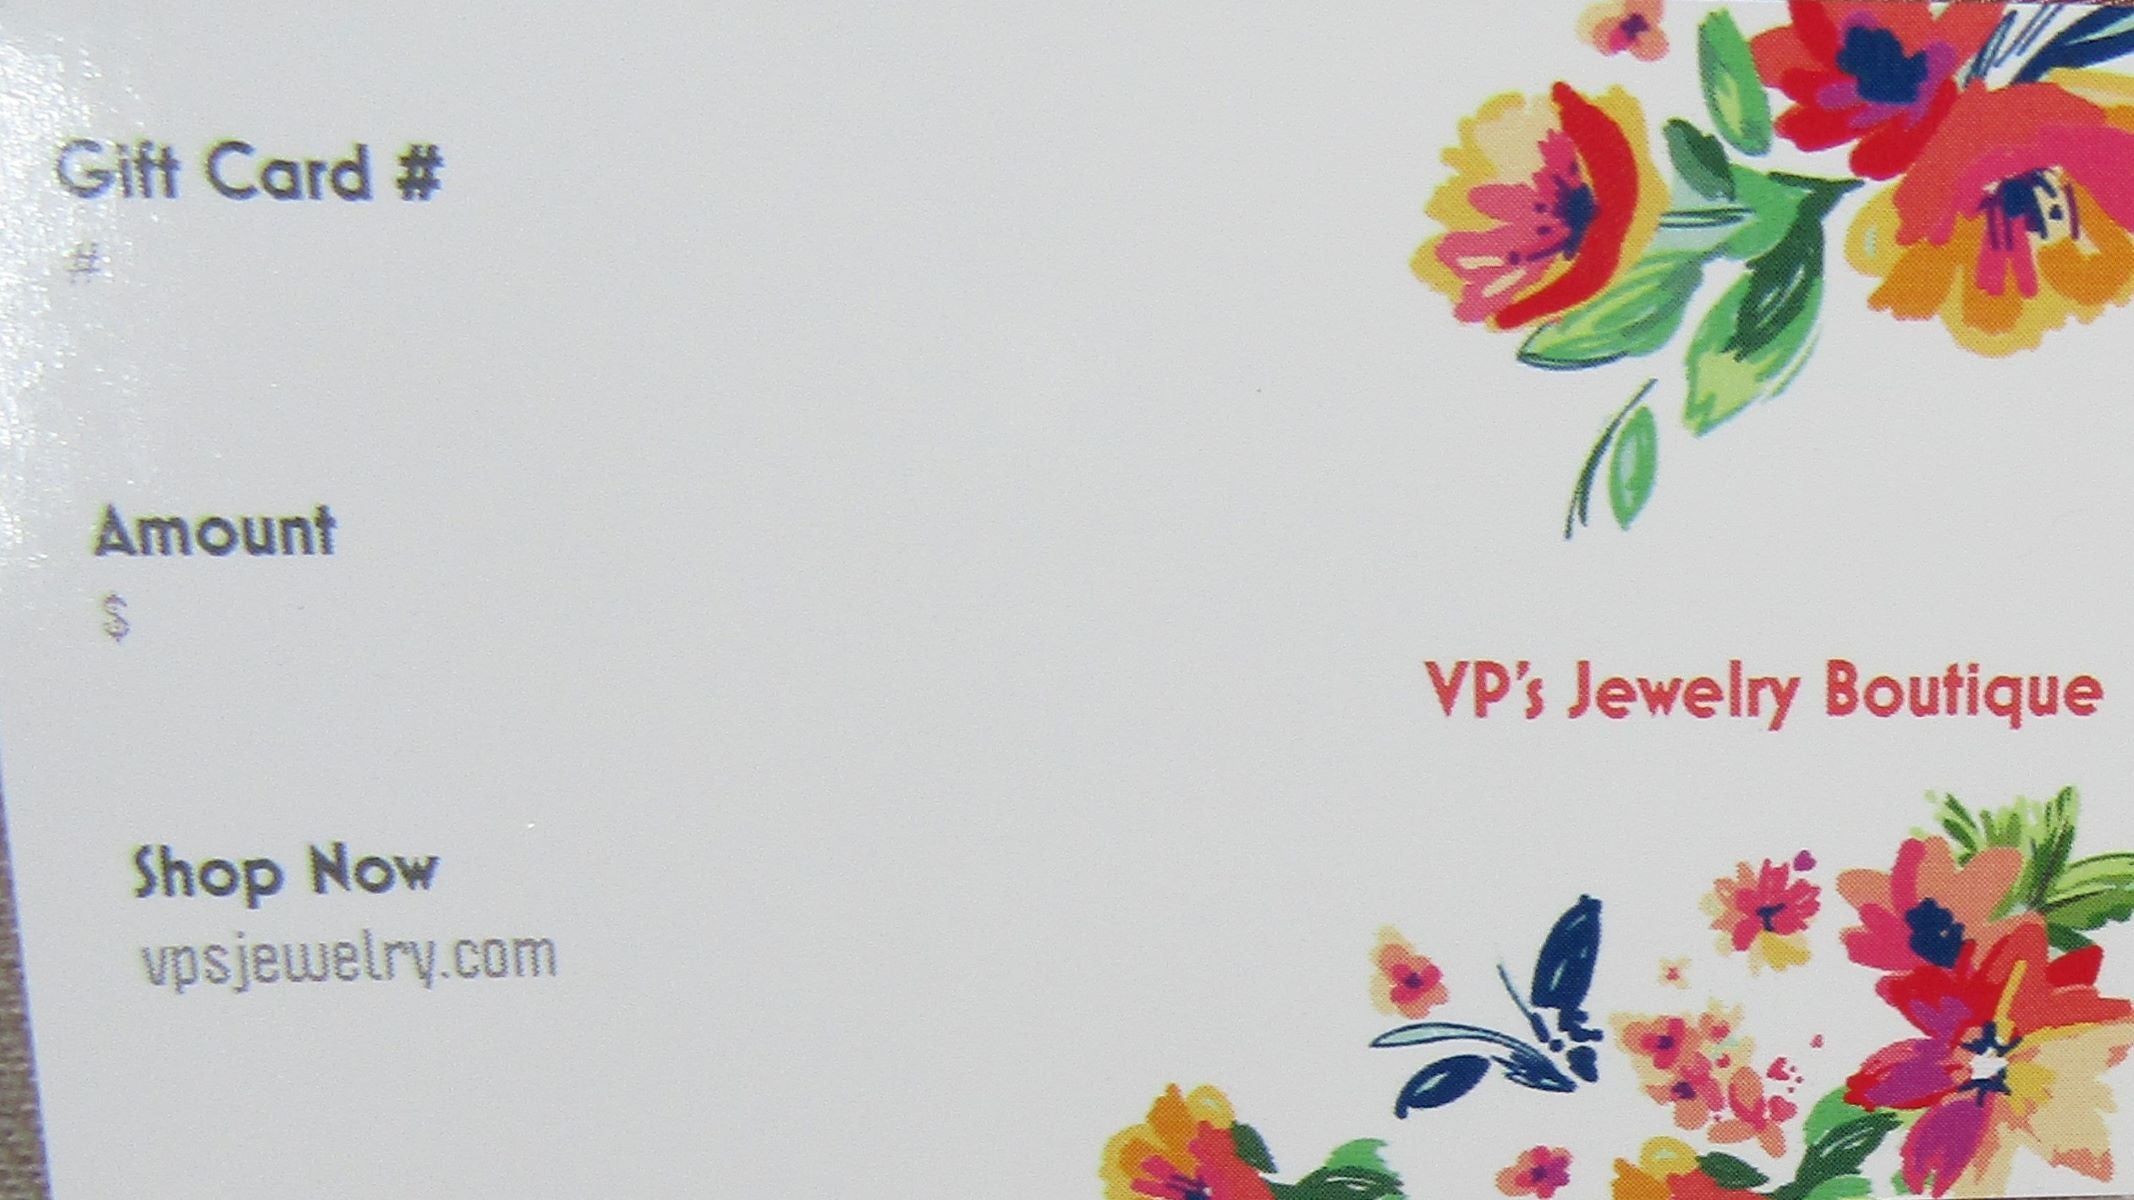 Gift Card for VP's Jewelry - VP's Jewelry